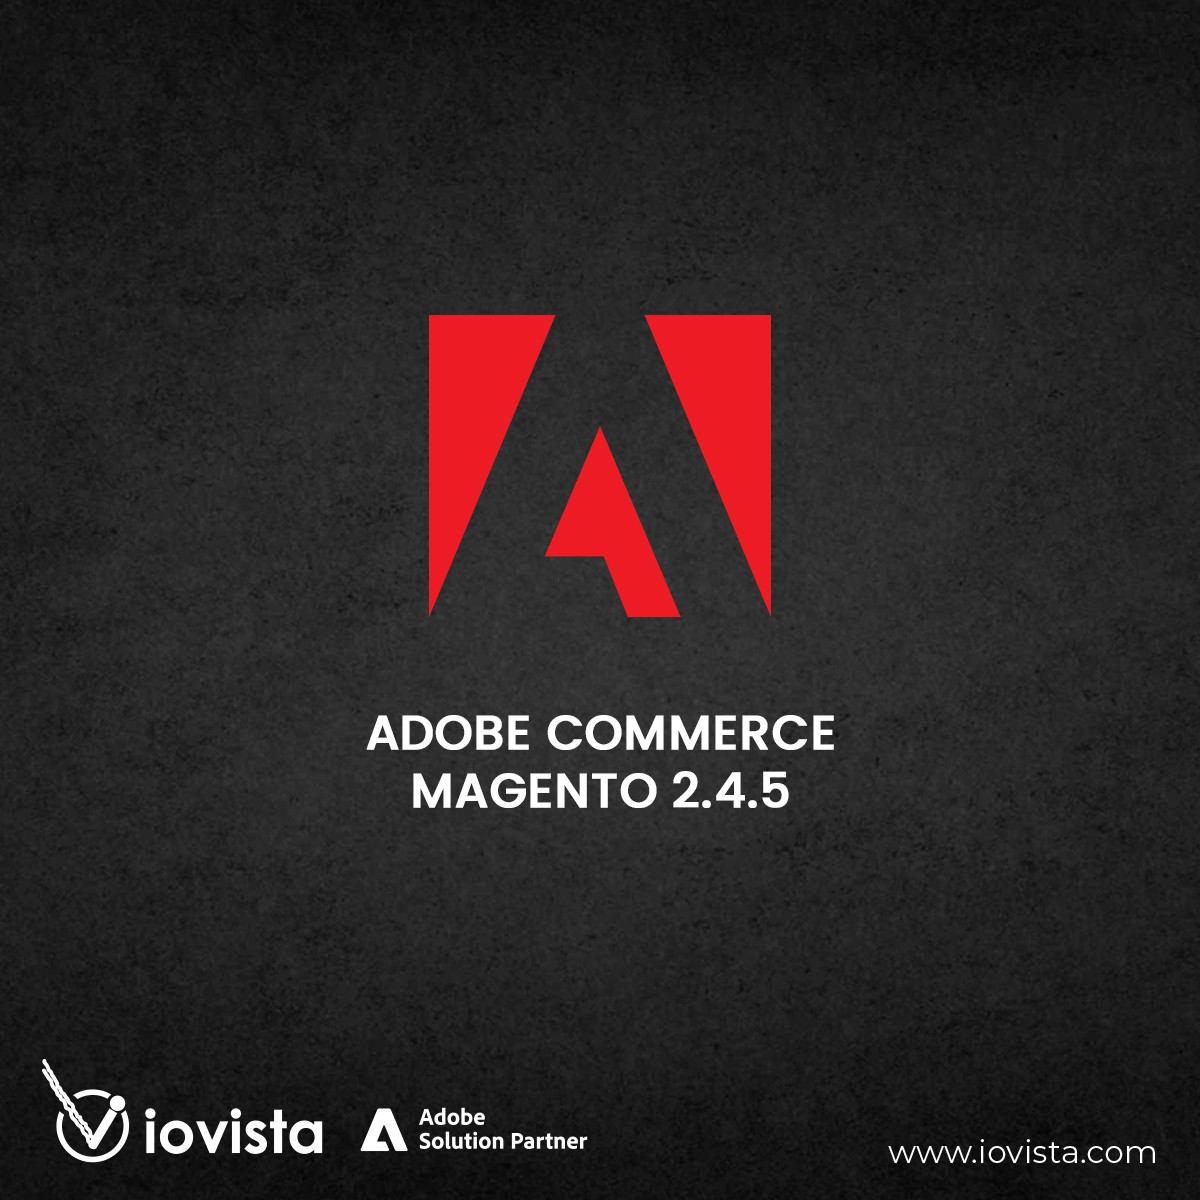 Adobe Releases Magento Open Source and Adobe Commerce 2.4.5